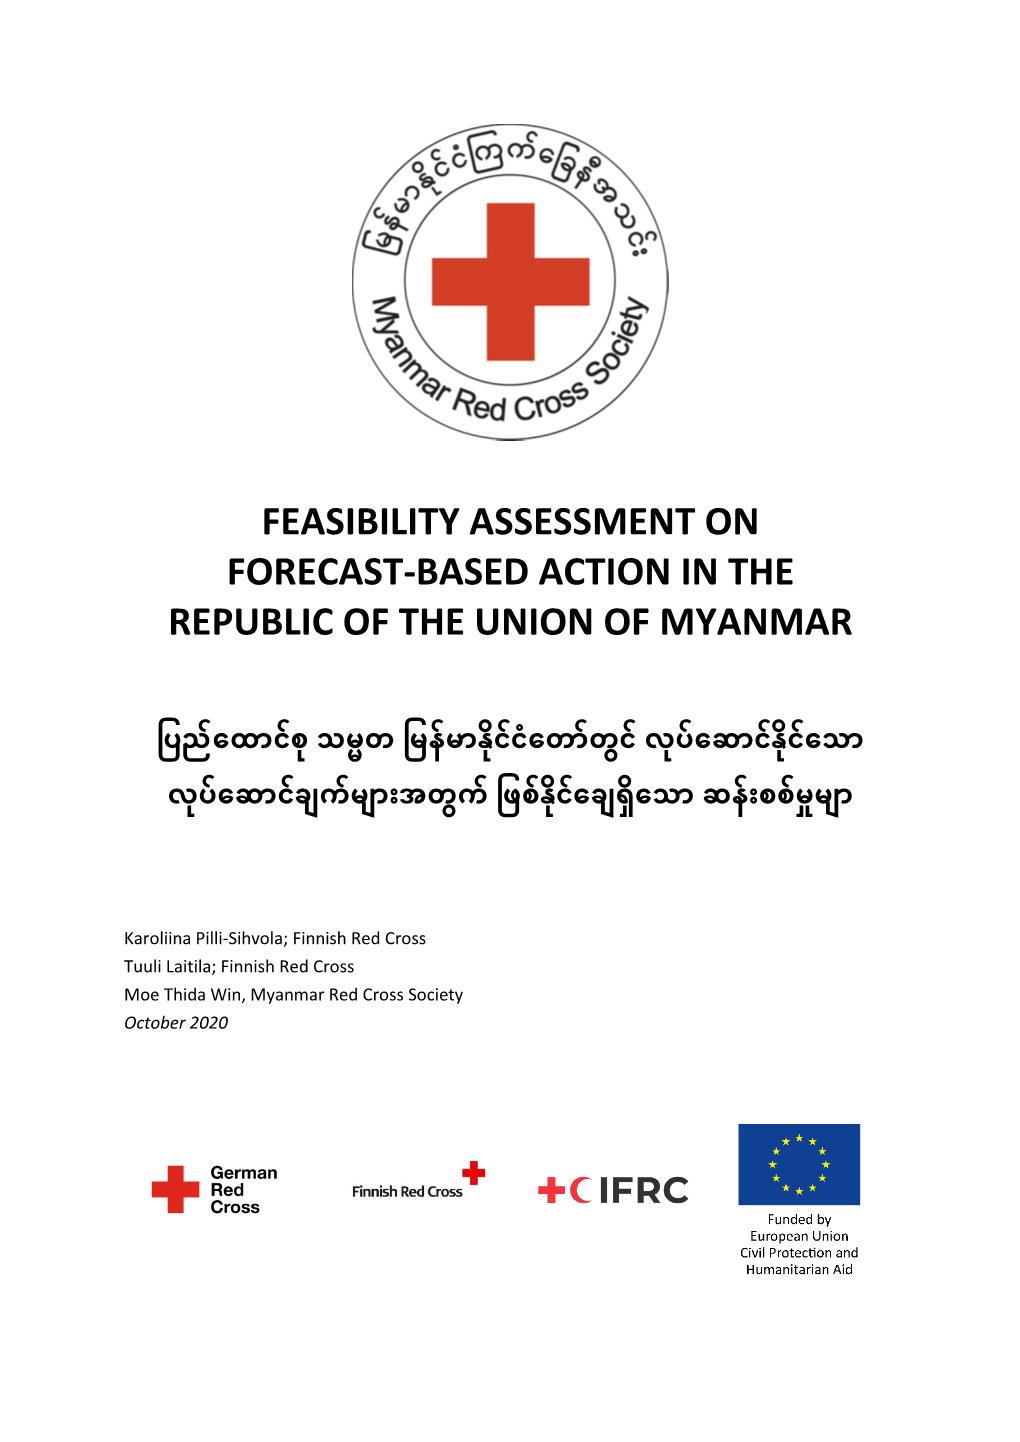 Feasibility Assessment on Forecast-Based Action in the Republic of the Union of Myanmar